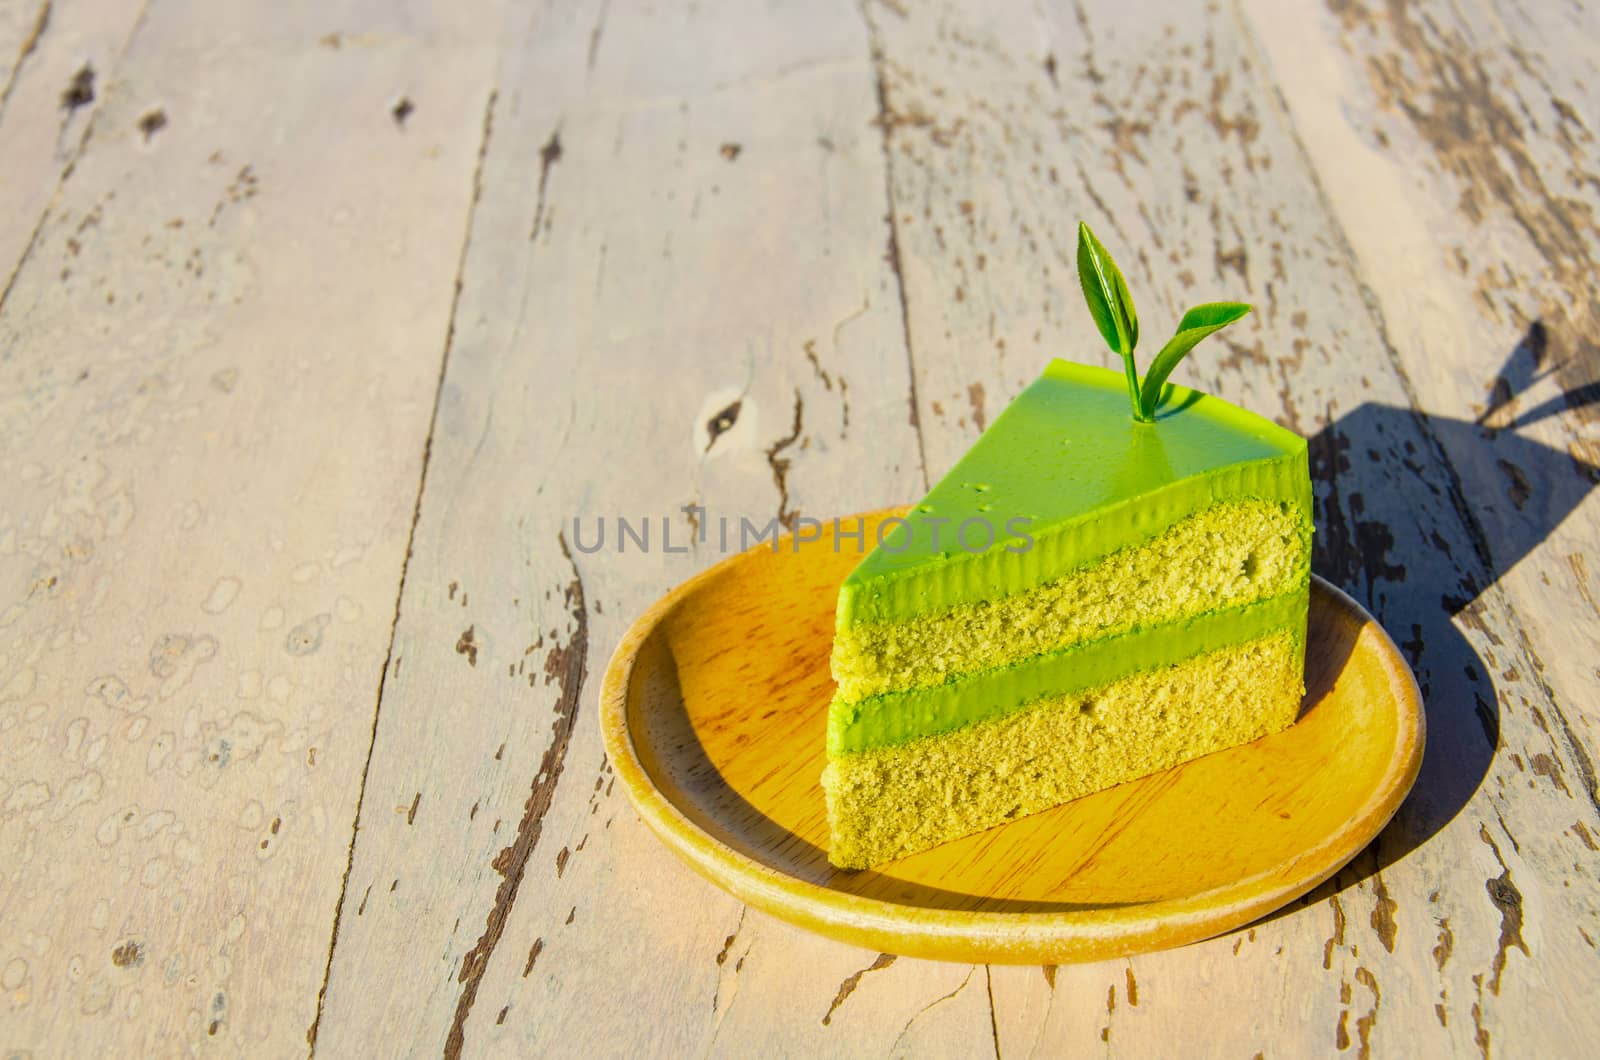 Green Tea Cake on the Wood Table by migrean